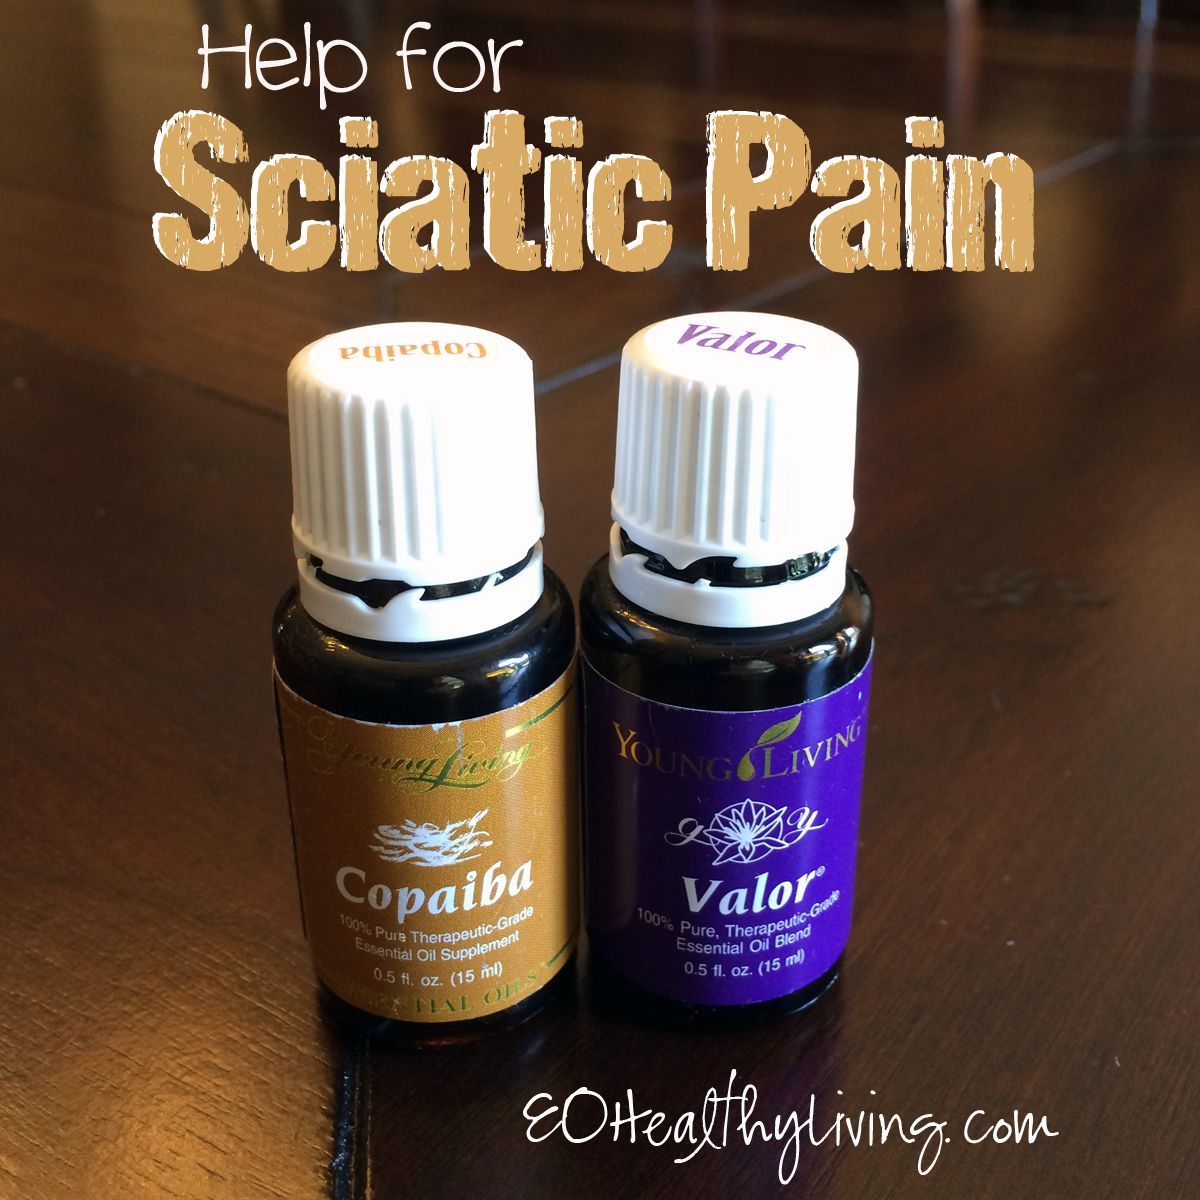 Sciatic Pain- rub a few drops of each onto my sciatic area and lower back several times a day to relieve the